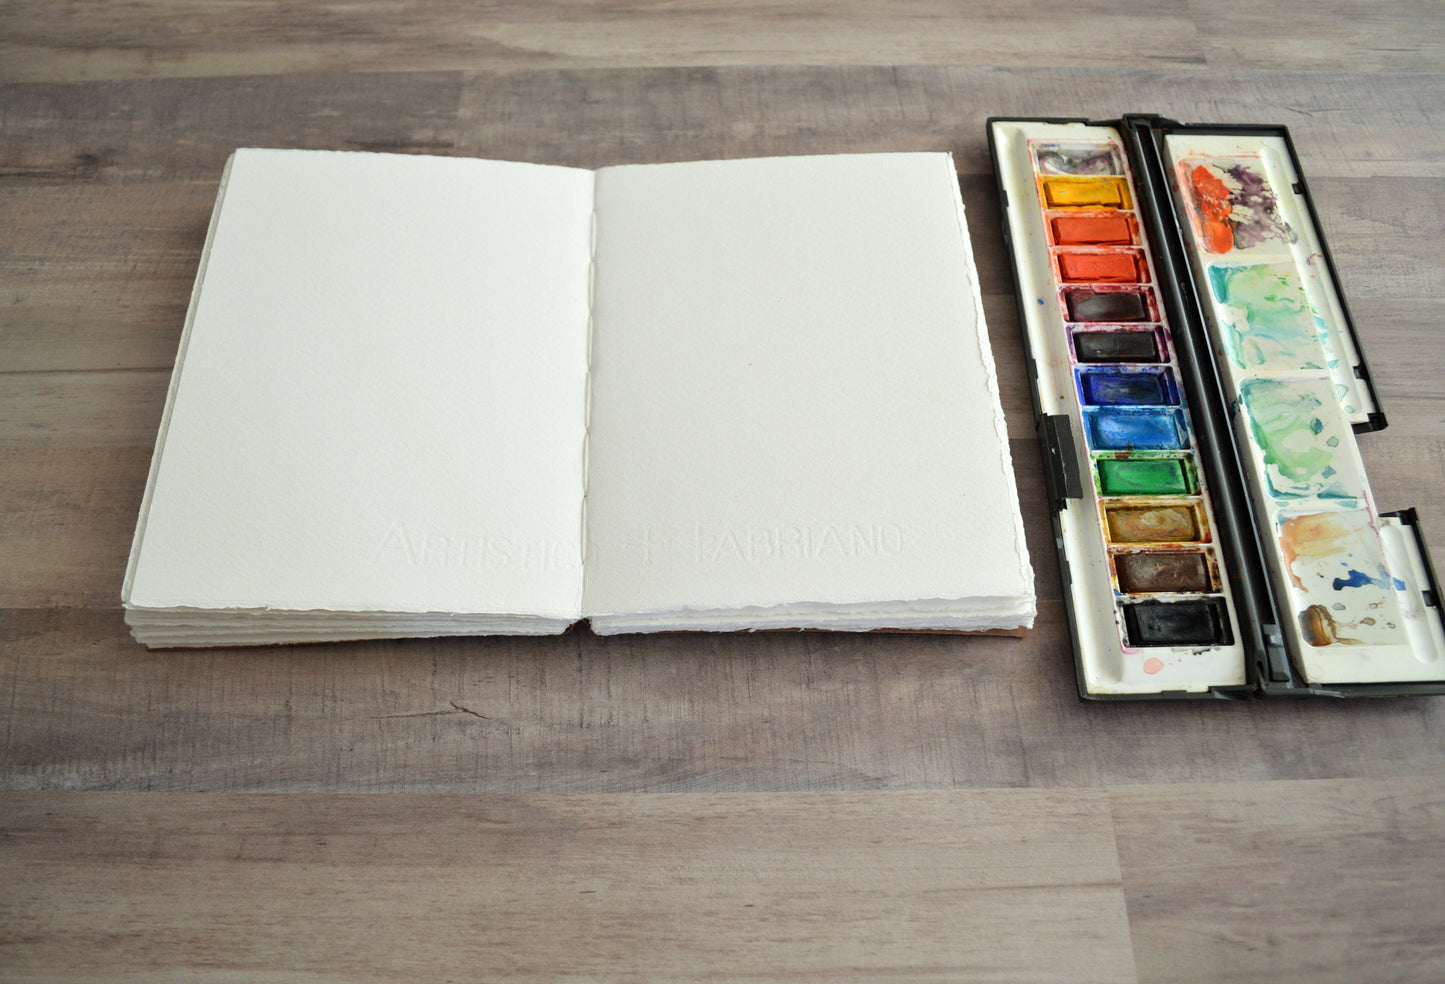 Cotton Watercolor Journal Sketchbook Travel Journal Artist blank book with Fabriano Artistico Hot pressed 140lbs and PL Leather Cover